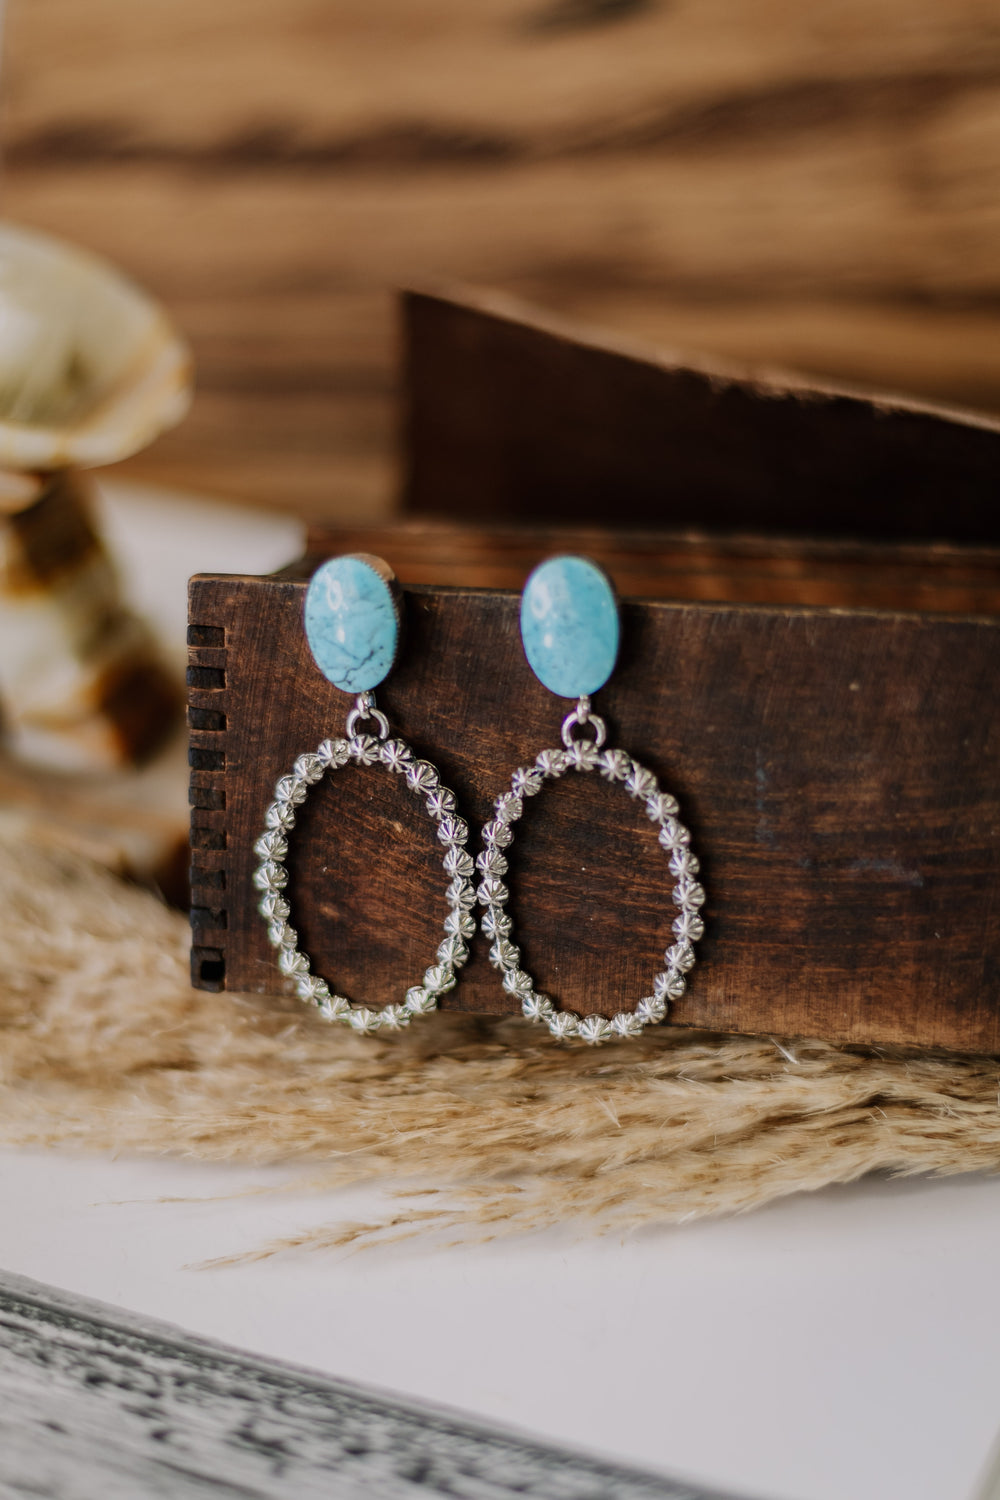 The Turquoise Kailee Earrings